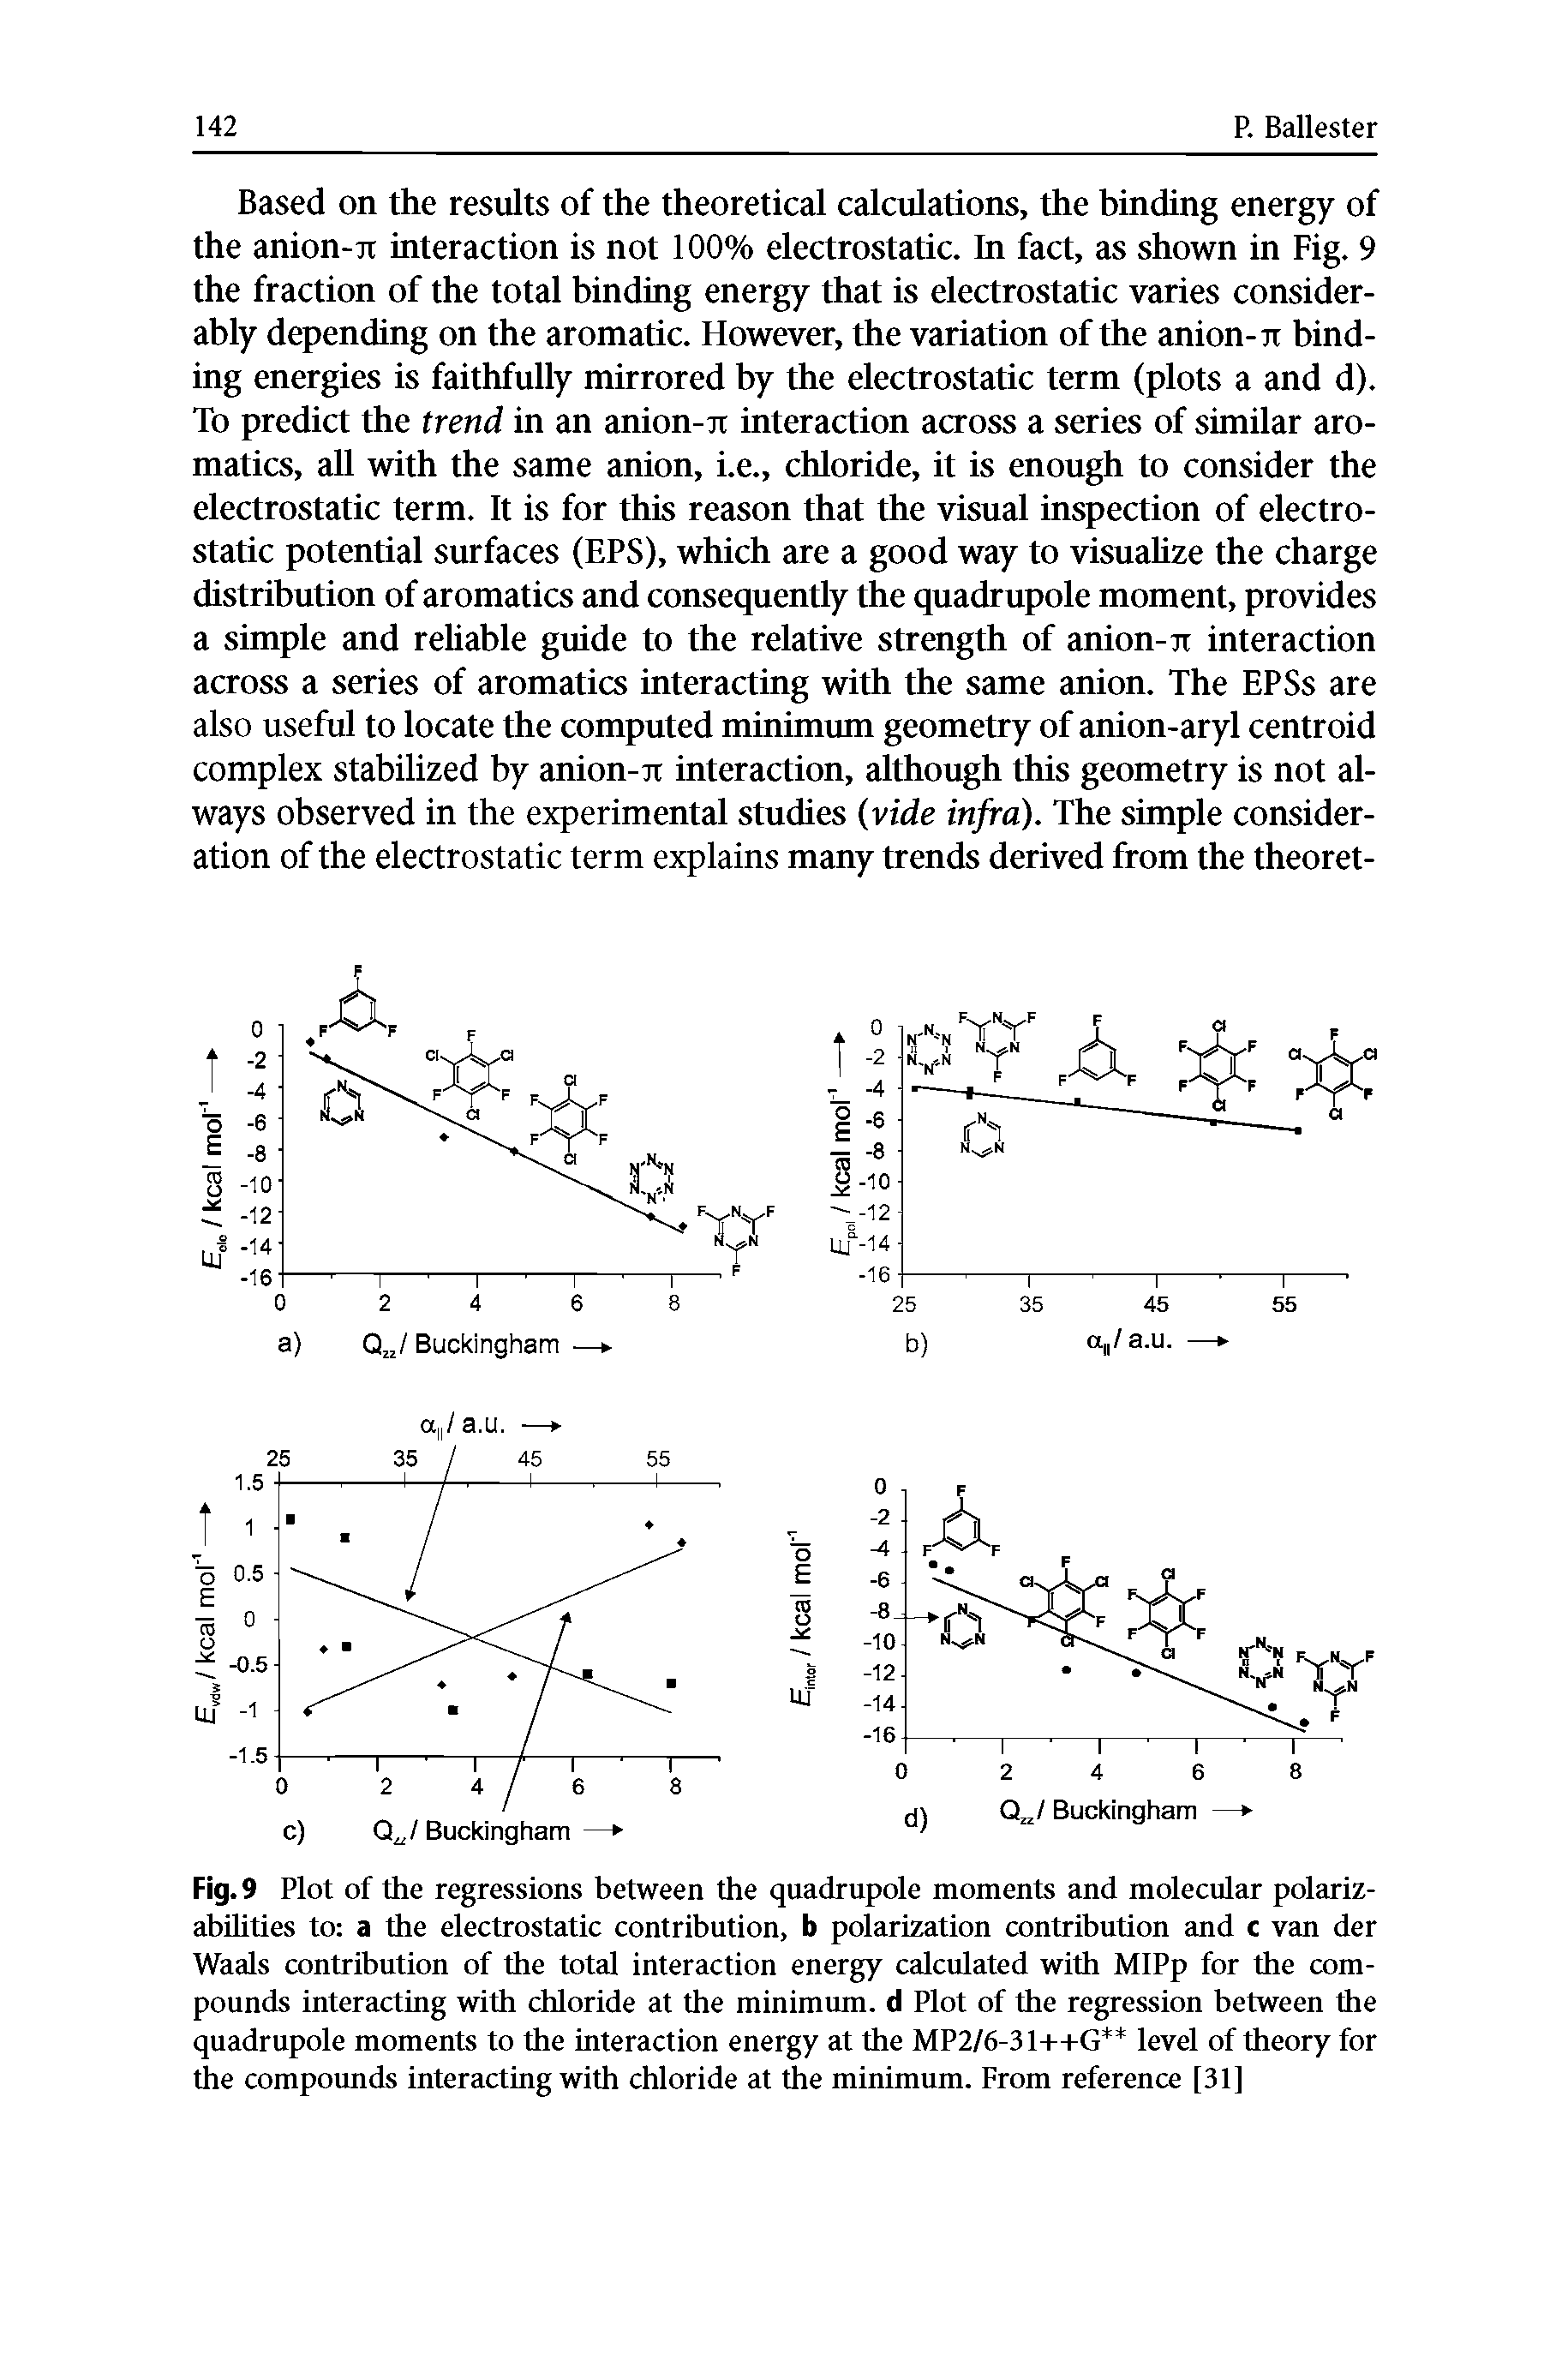 Fig. 9 Plot of the regressions between the quadrupole moments and molecular polarizabilities to a the electrostatic contribution, b polarization contribution and c van der Waals contribution of the total interaction energy calculated with MlPp for the compounds interacting with chloride at the minimum, d Plot of the regression between the quadrupole moments to the interaction energy at the MP2/6-31++G level of theory for the compounds interacting with chloride at the minimum. From reference [31]...